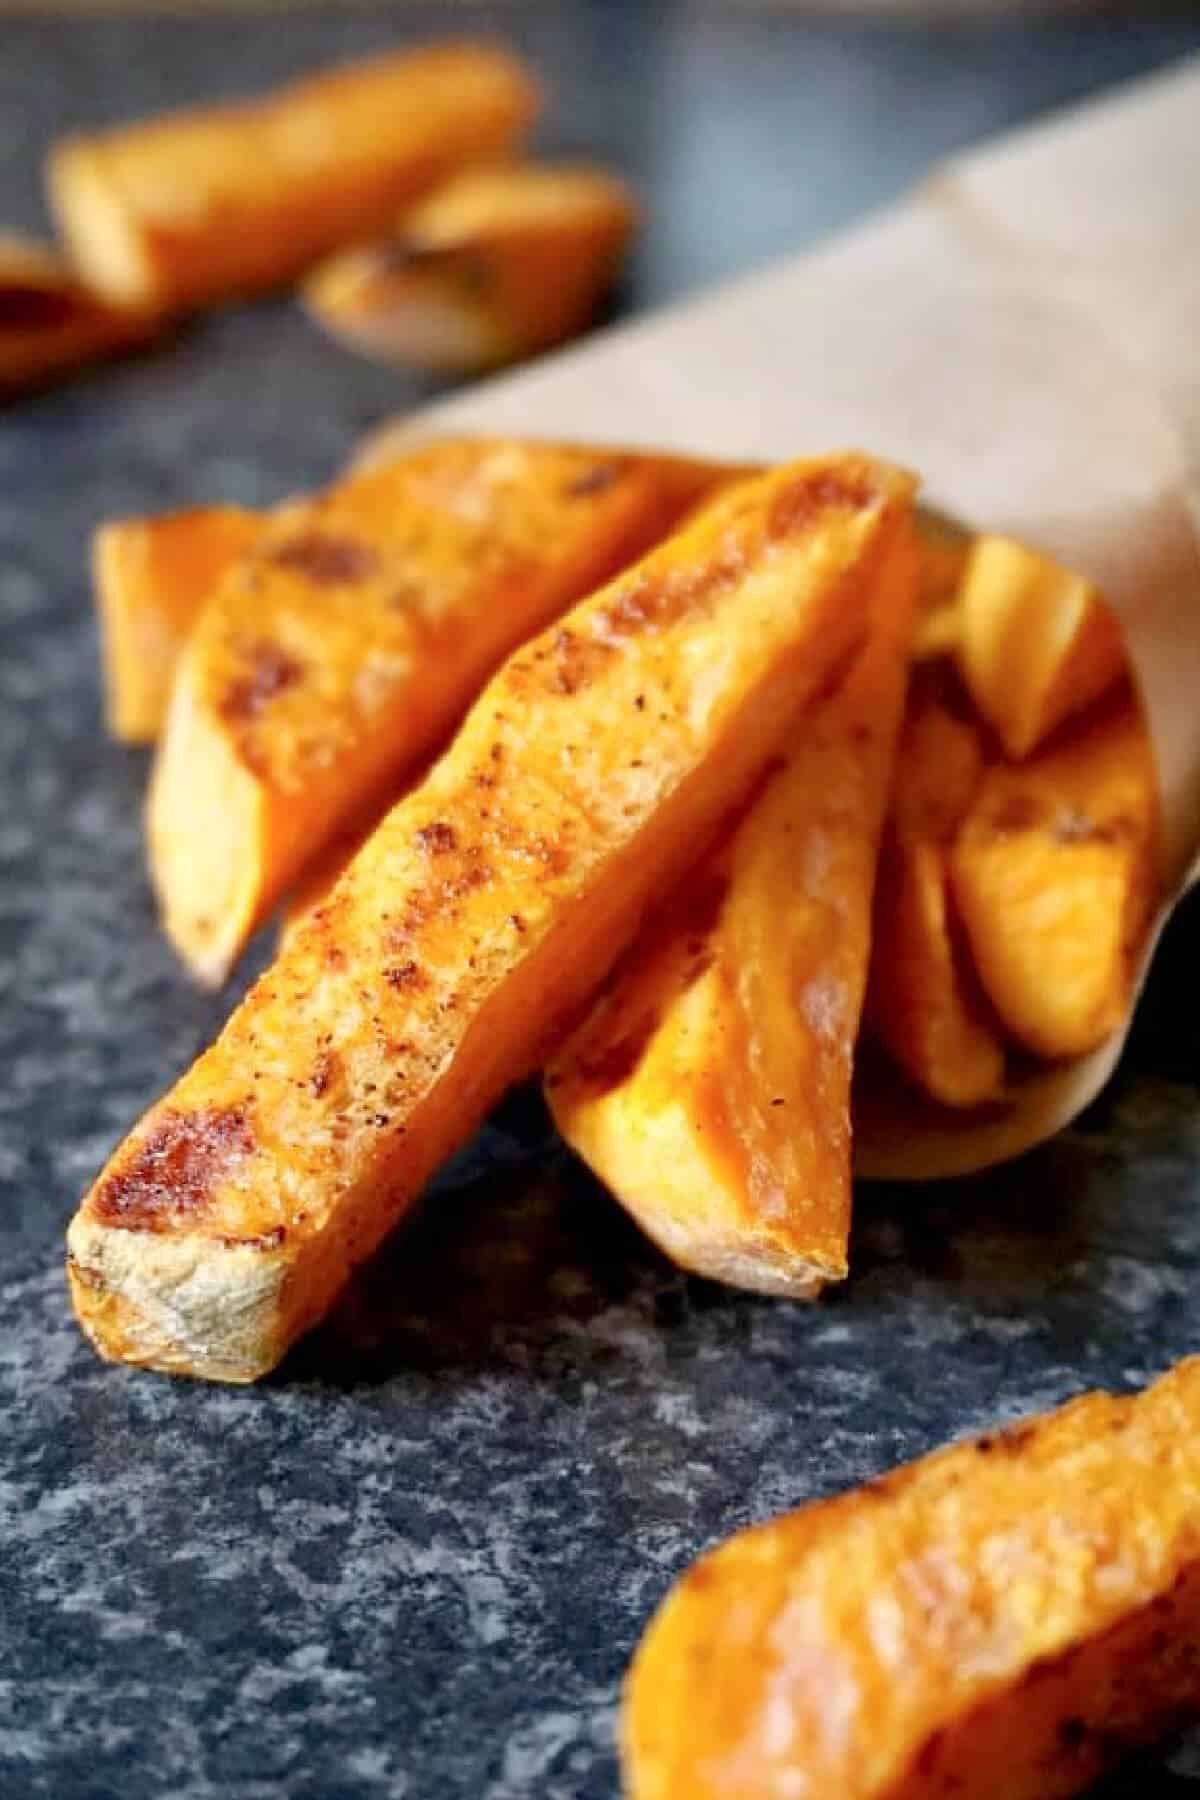 A paper cone with sweet potato fries.